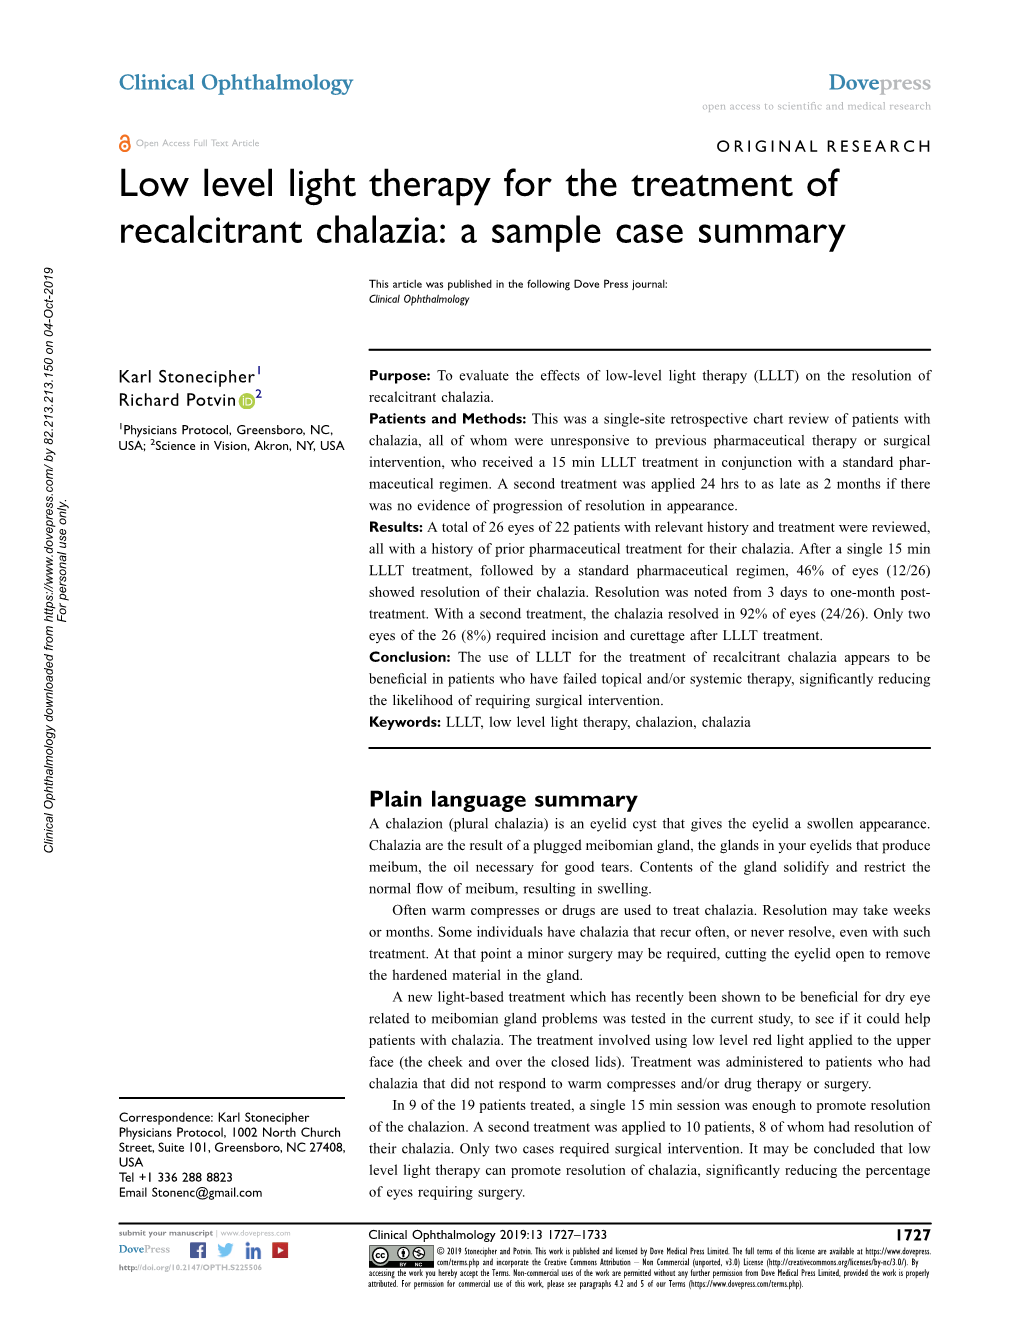 Low Level Light Therapy for the Treatment of Recalcitrant Chalazia: a Sample Case Summary